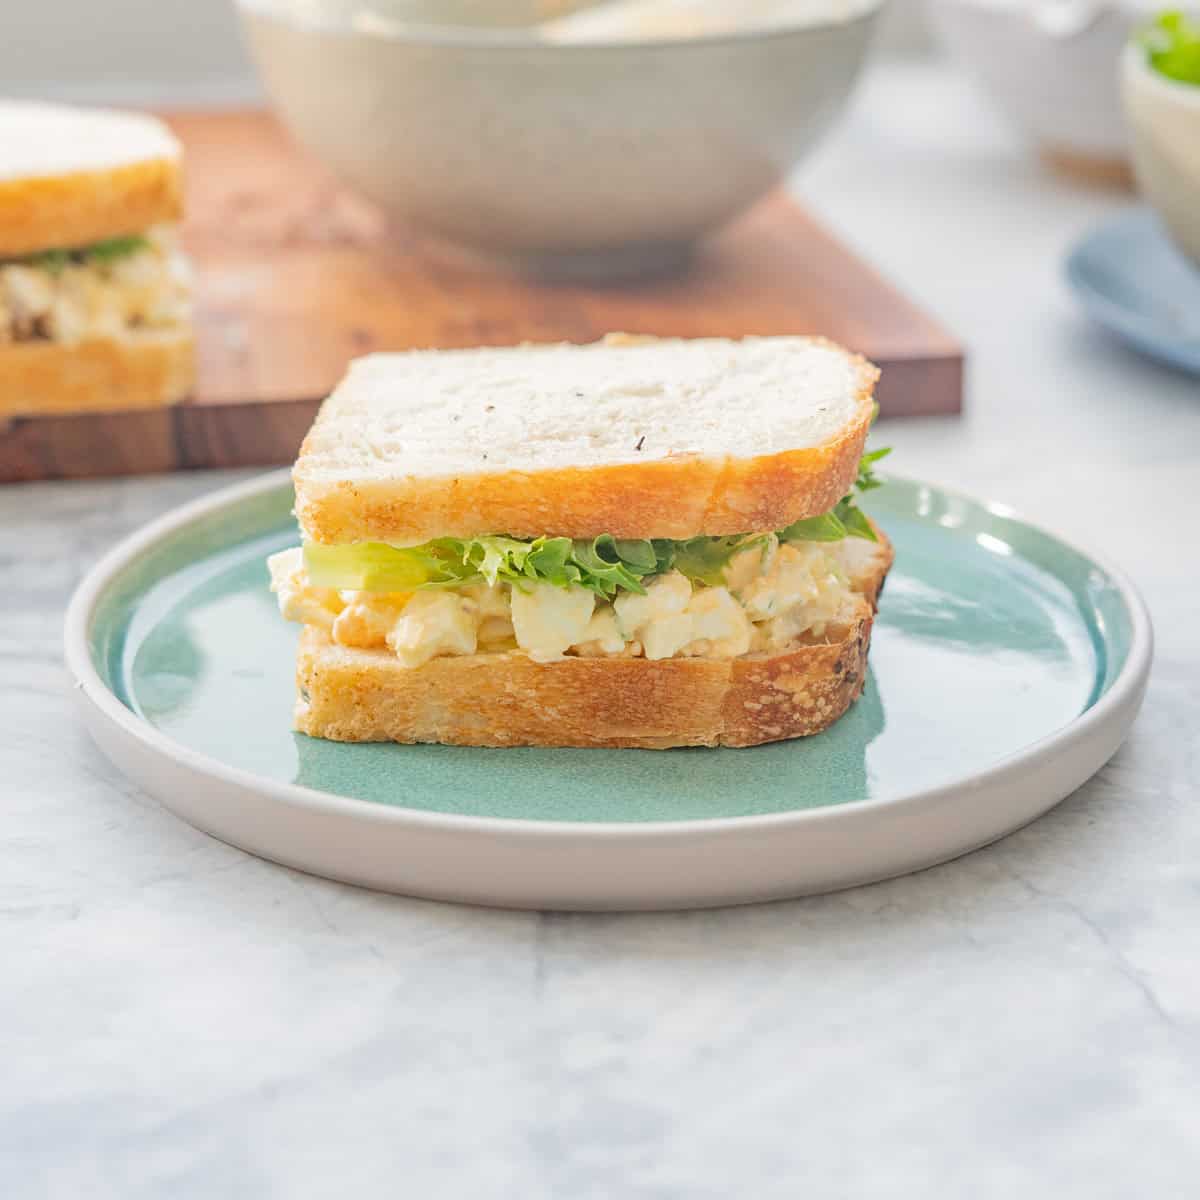 An egg salad and lettuce salad on a turquoise ceramic plate with a second sandwich and a ceramic bowl in the background.